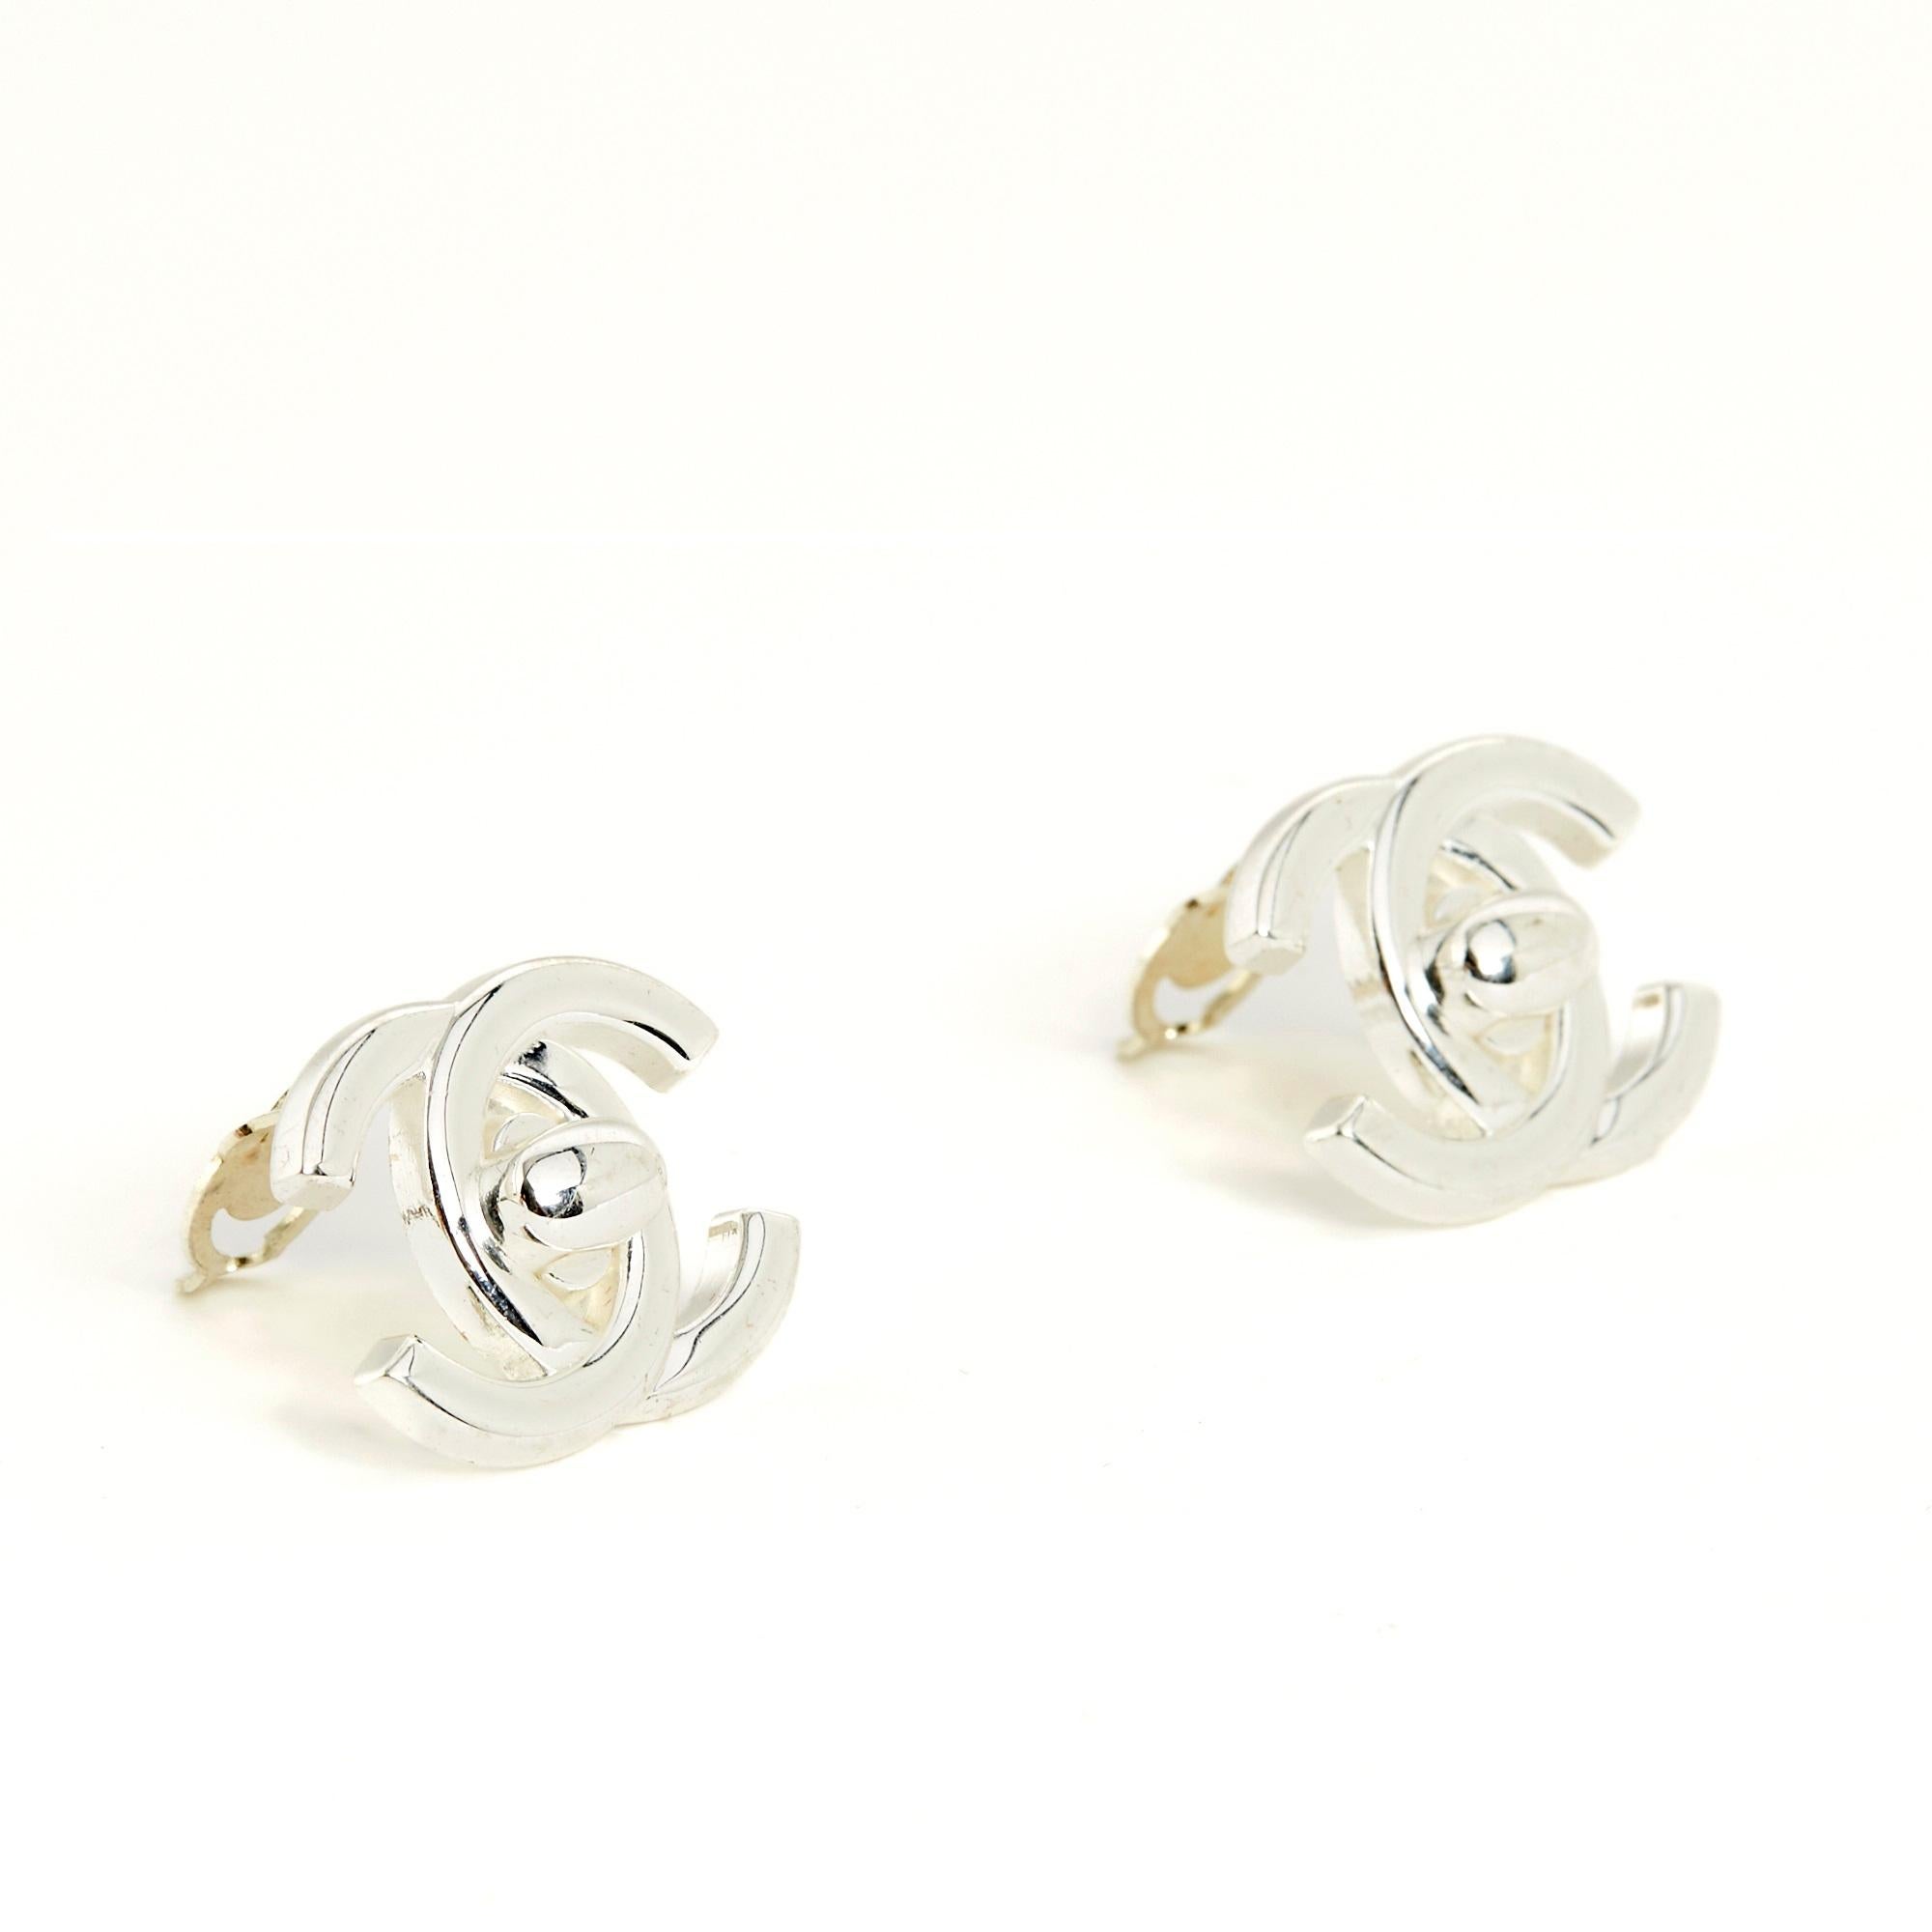 Chanel clip-on earrings, size L, in gold metal with the motif of the famous 